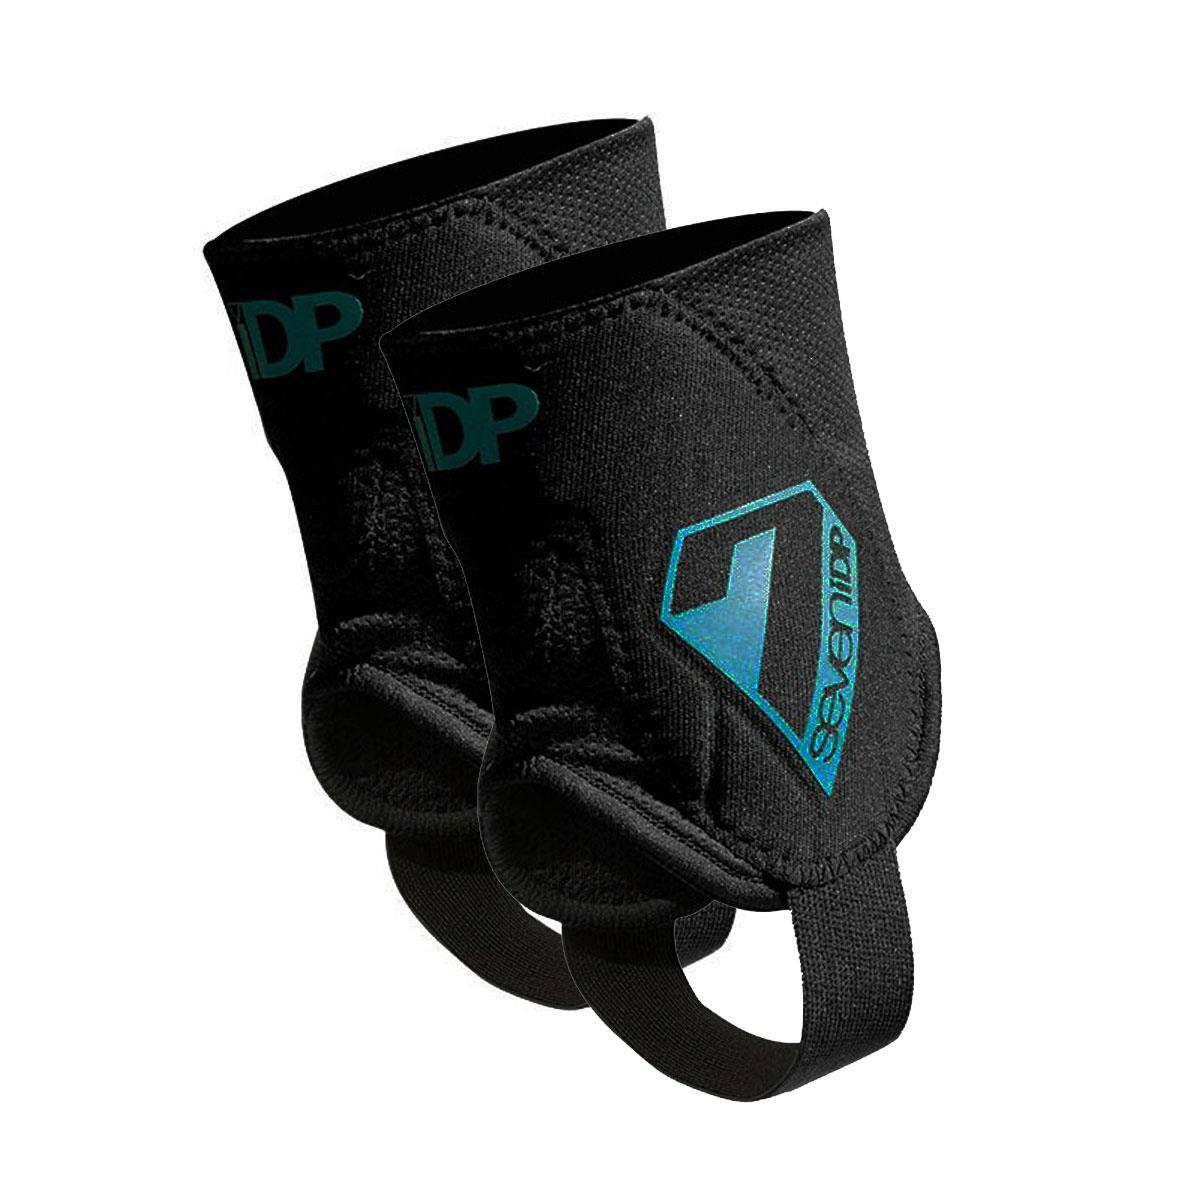 7IDP 7iDP Seven iDP Control Ankle Guards